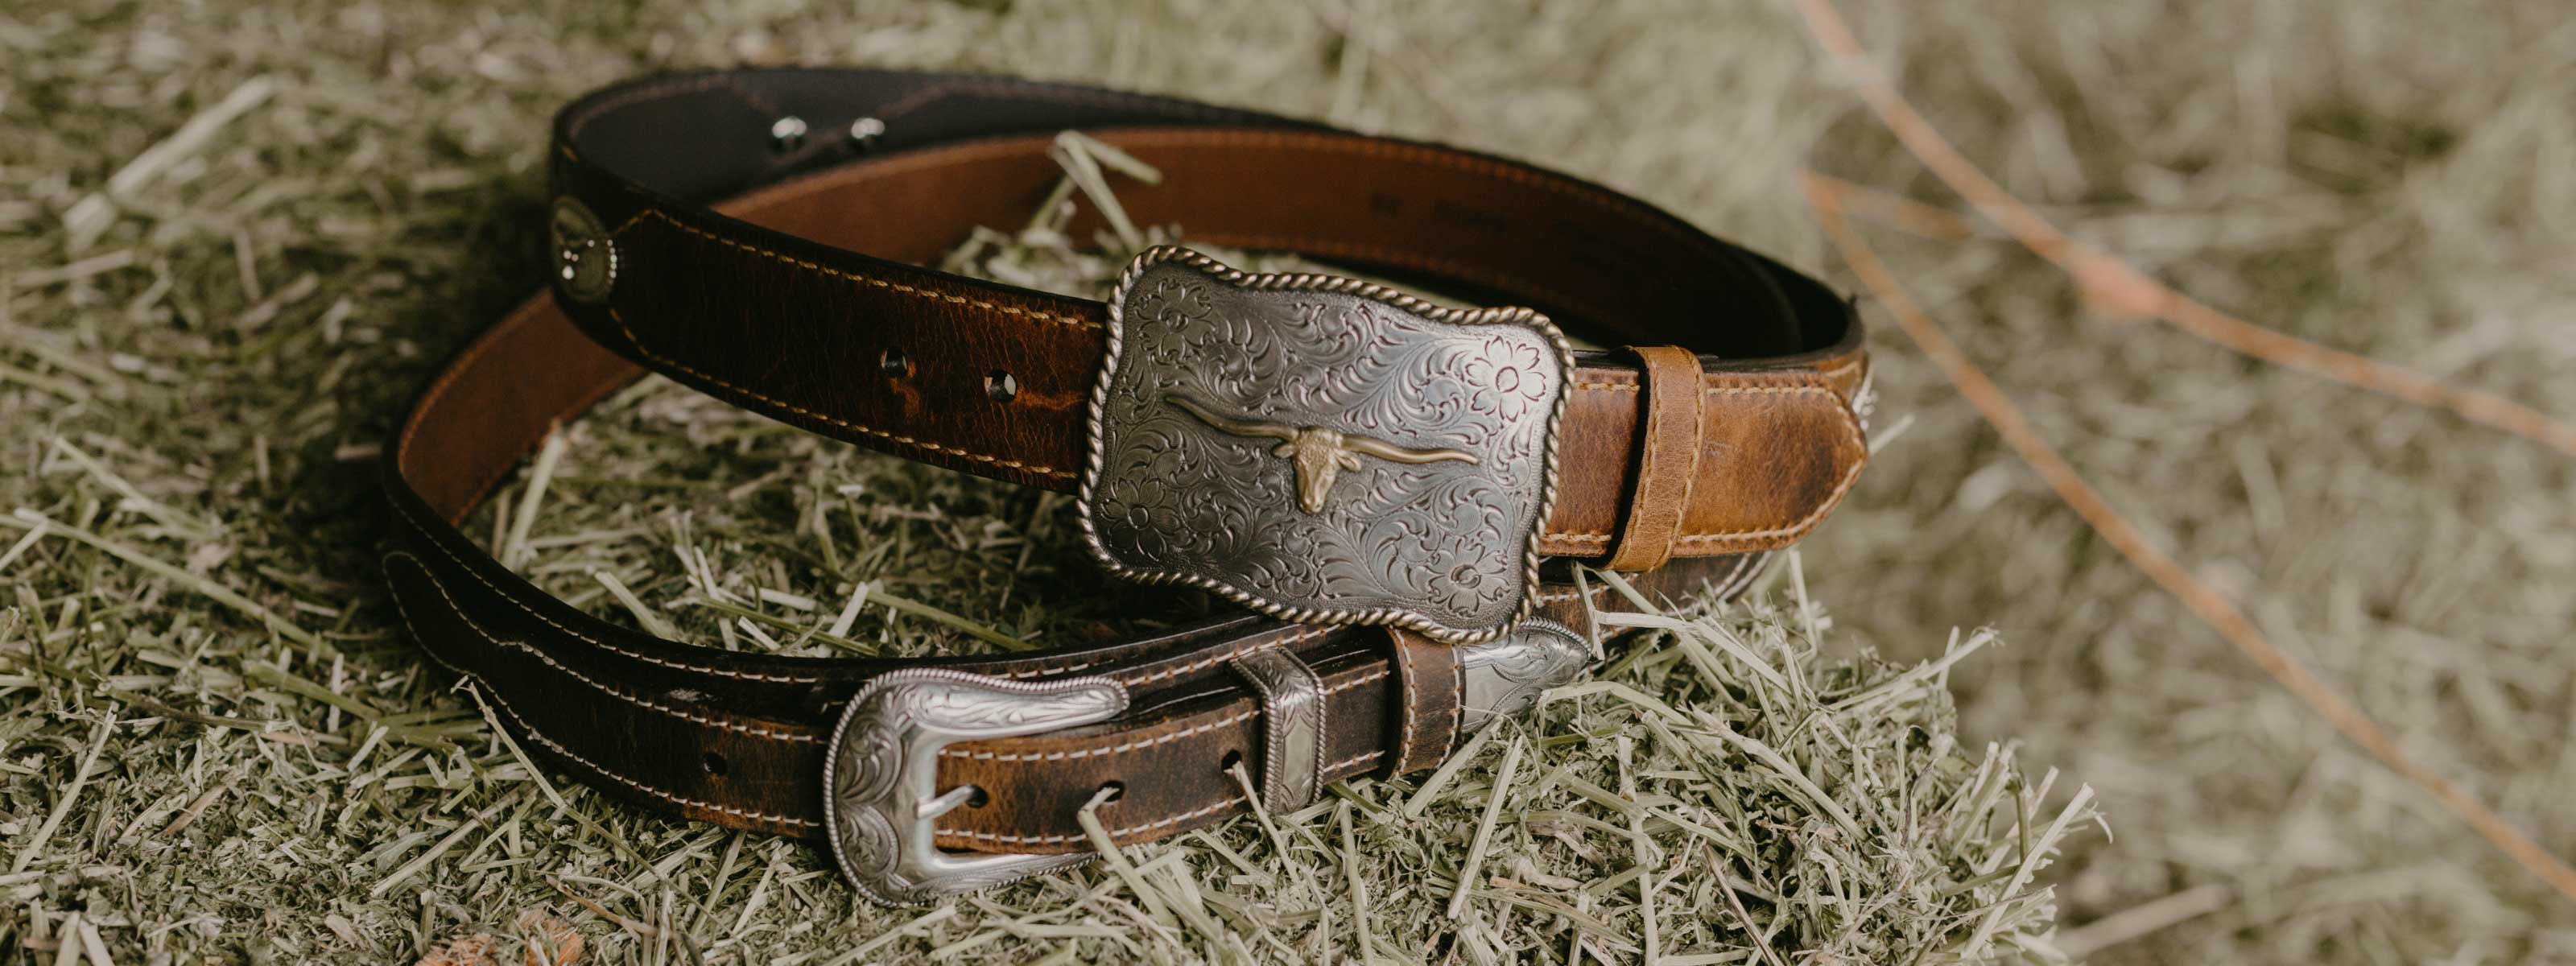 Lejon Belts  Handcrafted Leather Belts Made in the USA